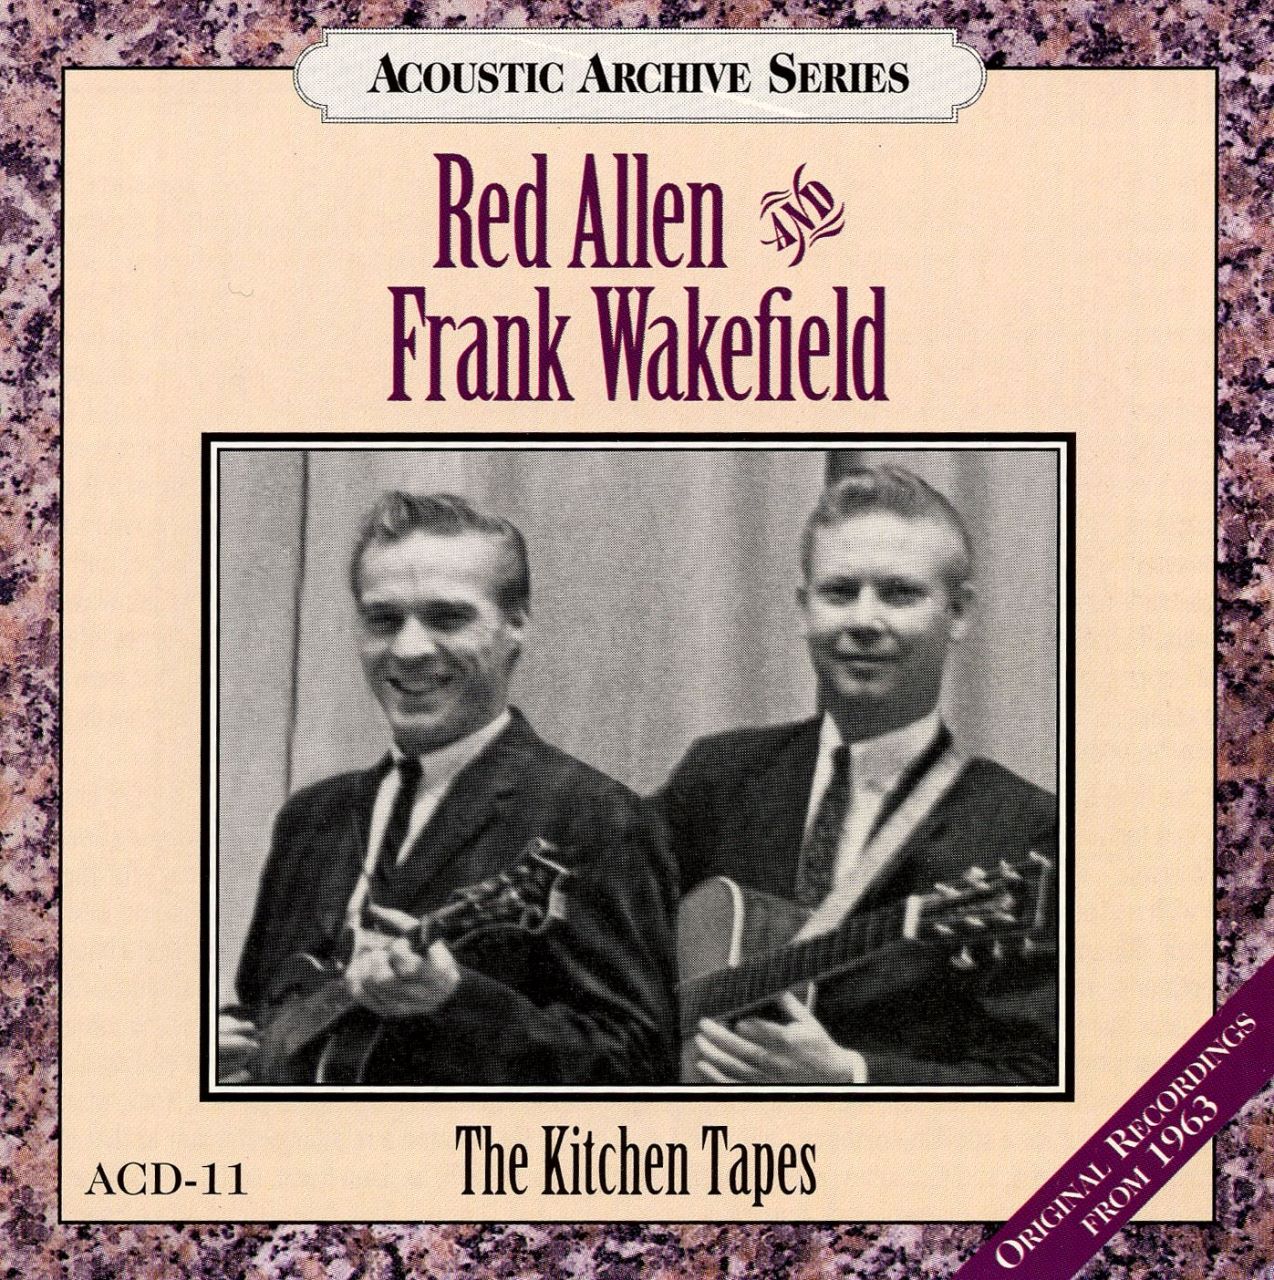 Red Allen & Frank Wakefield - The Kitchen Tapes cover album